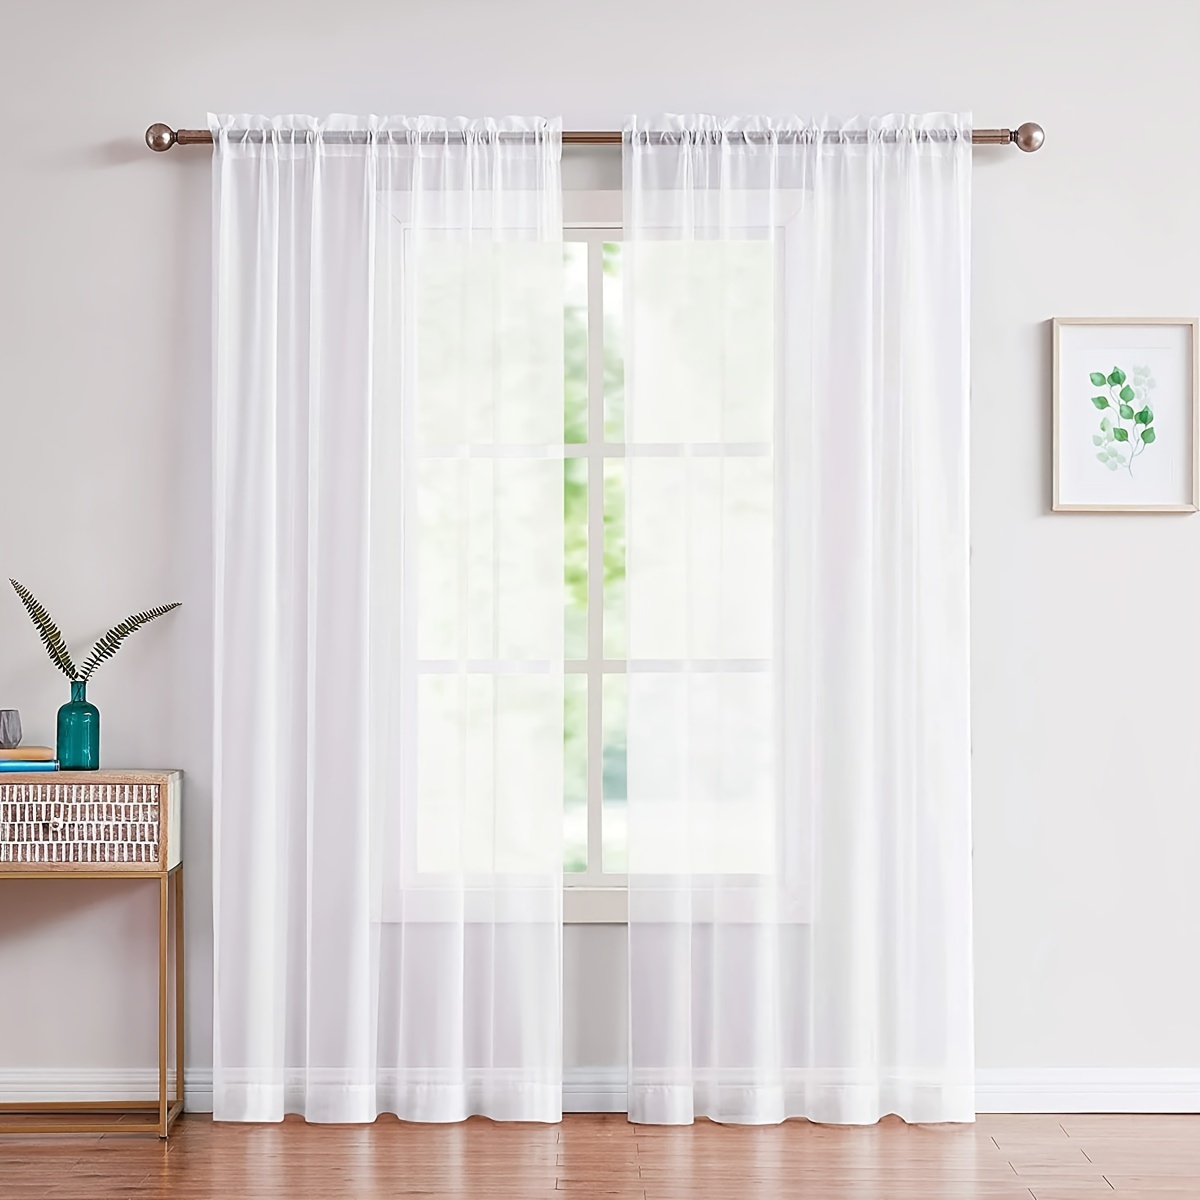 

2pcs Sheer White Curtains Set, Rod Pocket Voile Sheer Curtain, Light Weight Curtains For Living Room And Bedroom Office Home Decoration